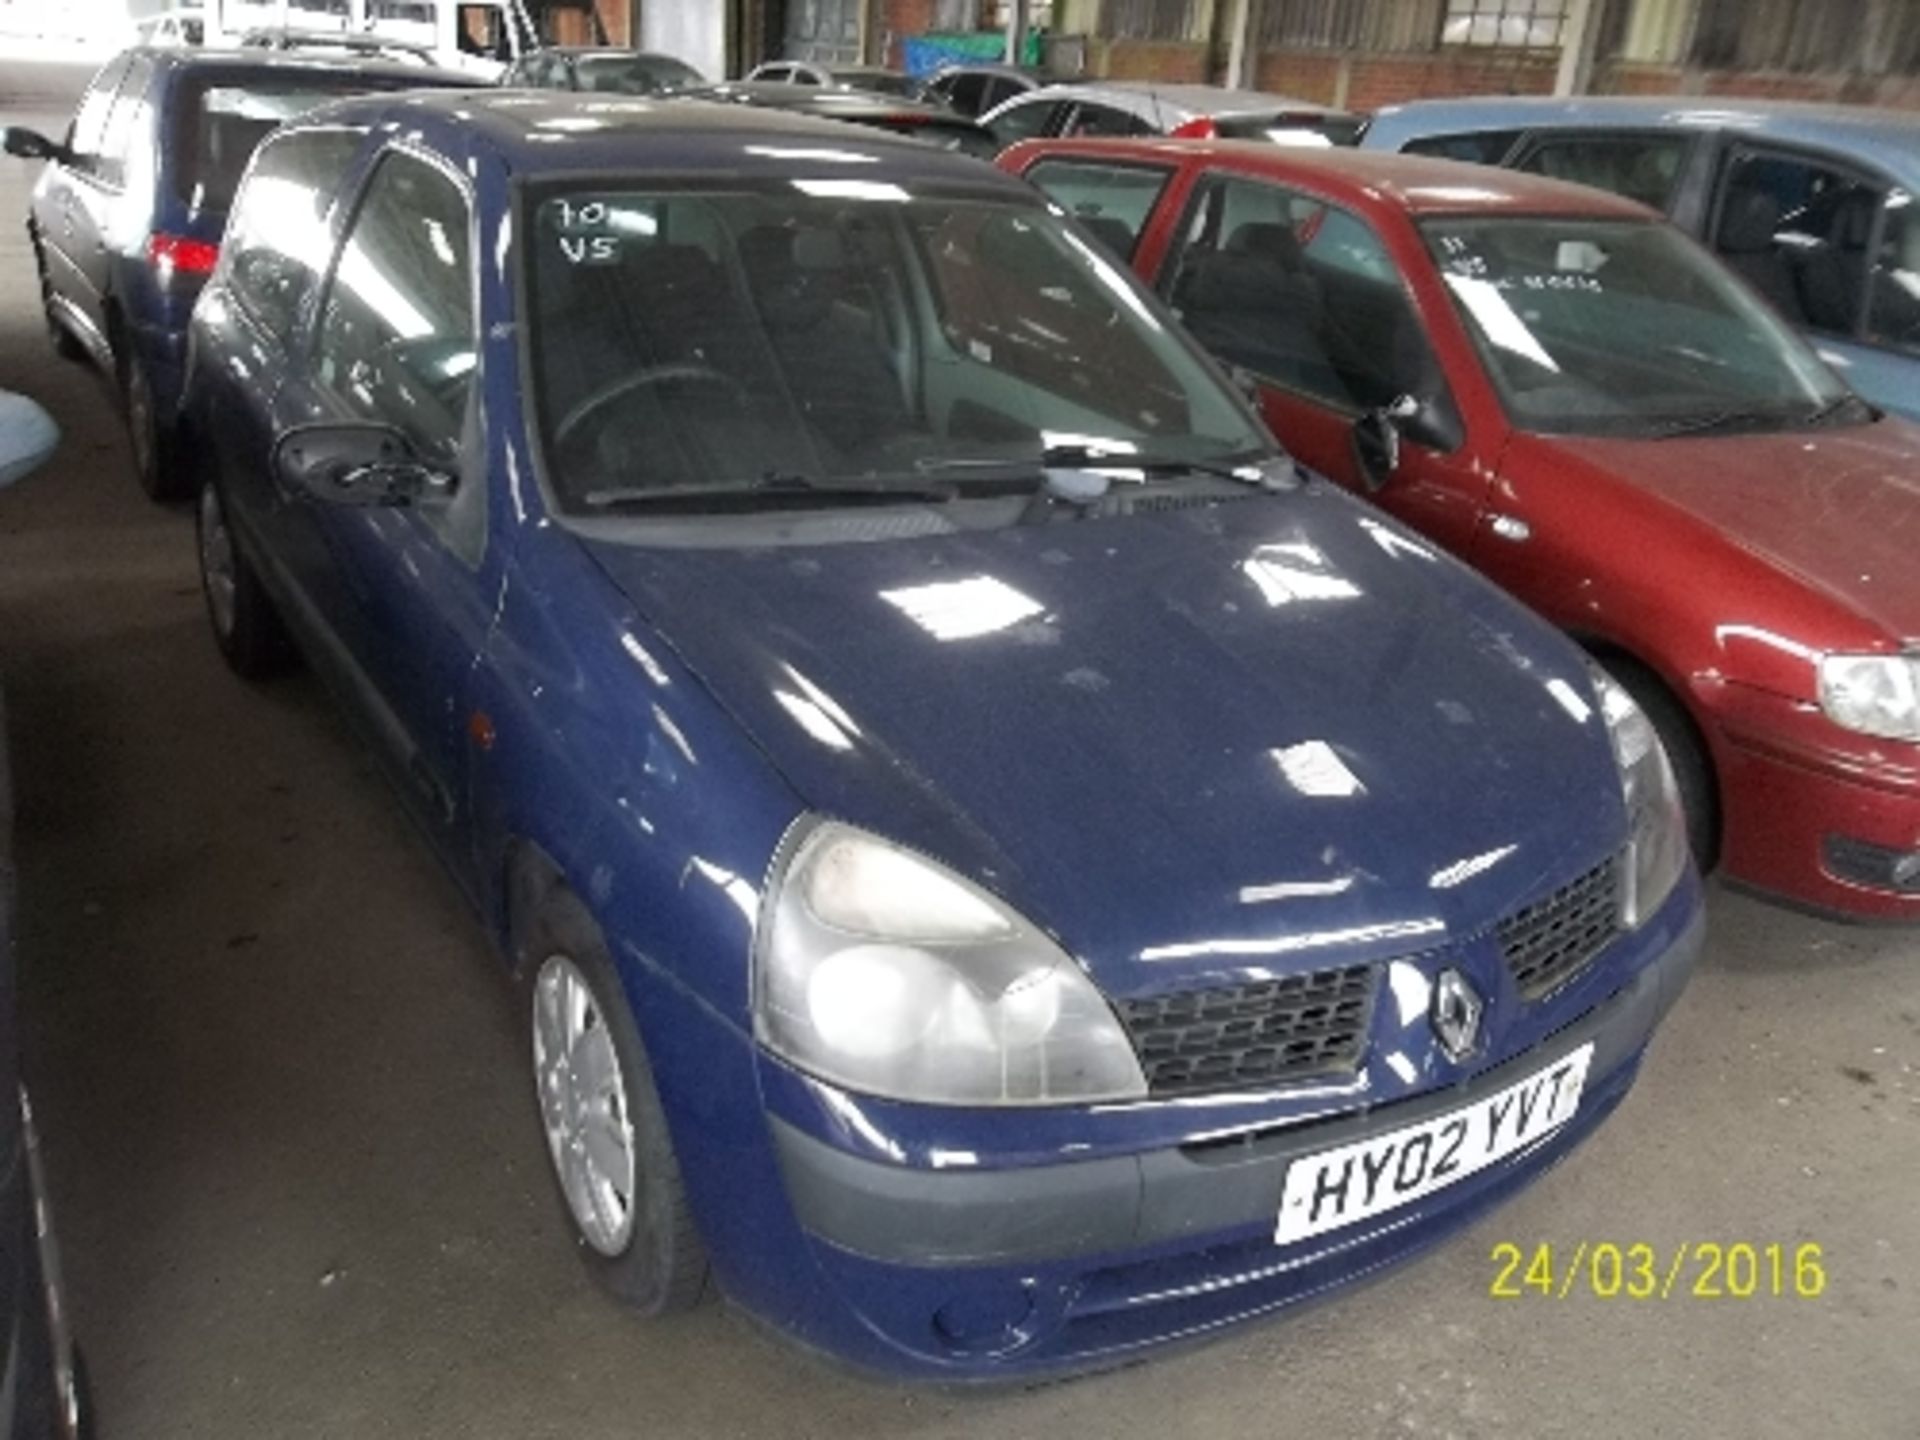 Renault Clio Expression 16V - HY02 YVT Date of registration: 07.05.2002 1149cc, petrol, manual, blue - Image 2 of 4